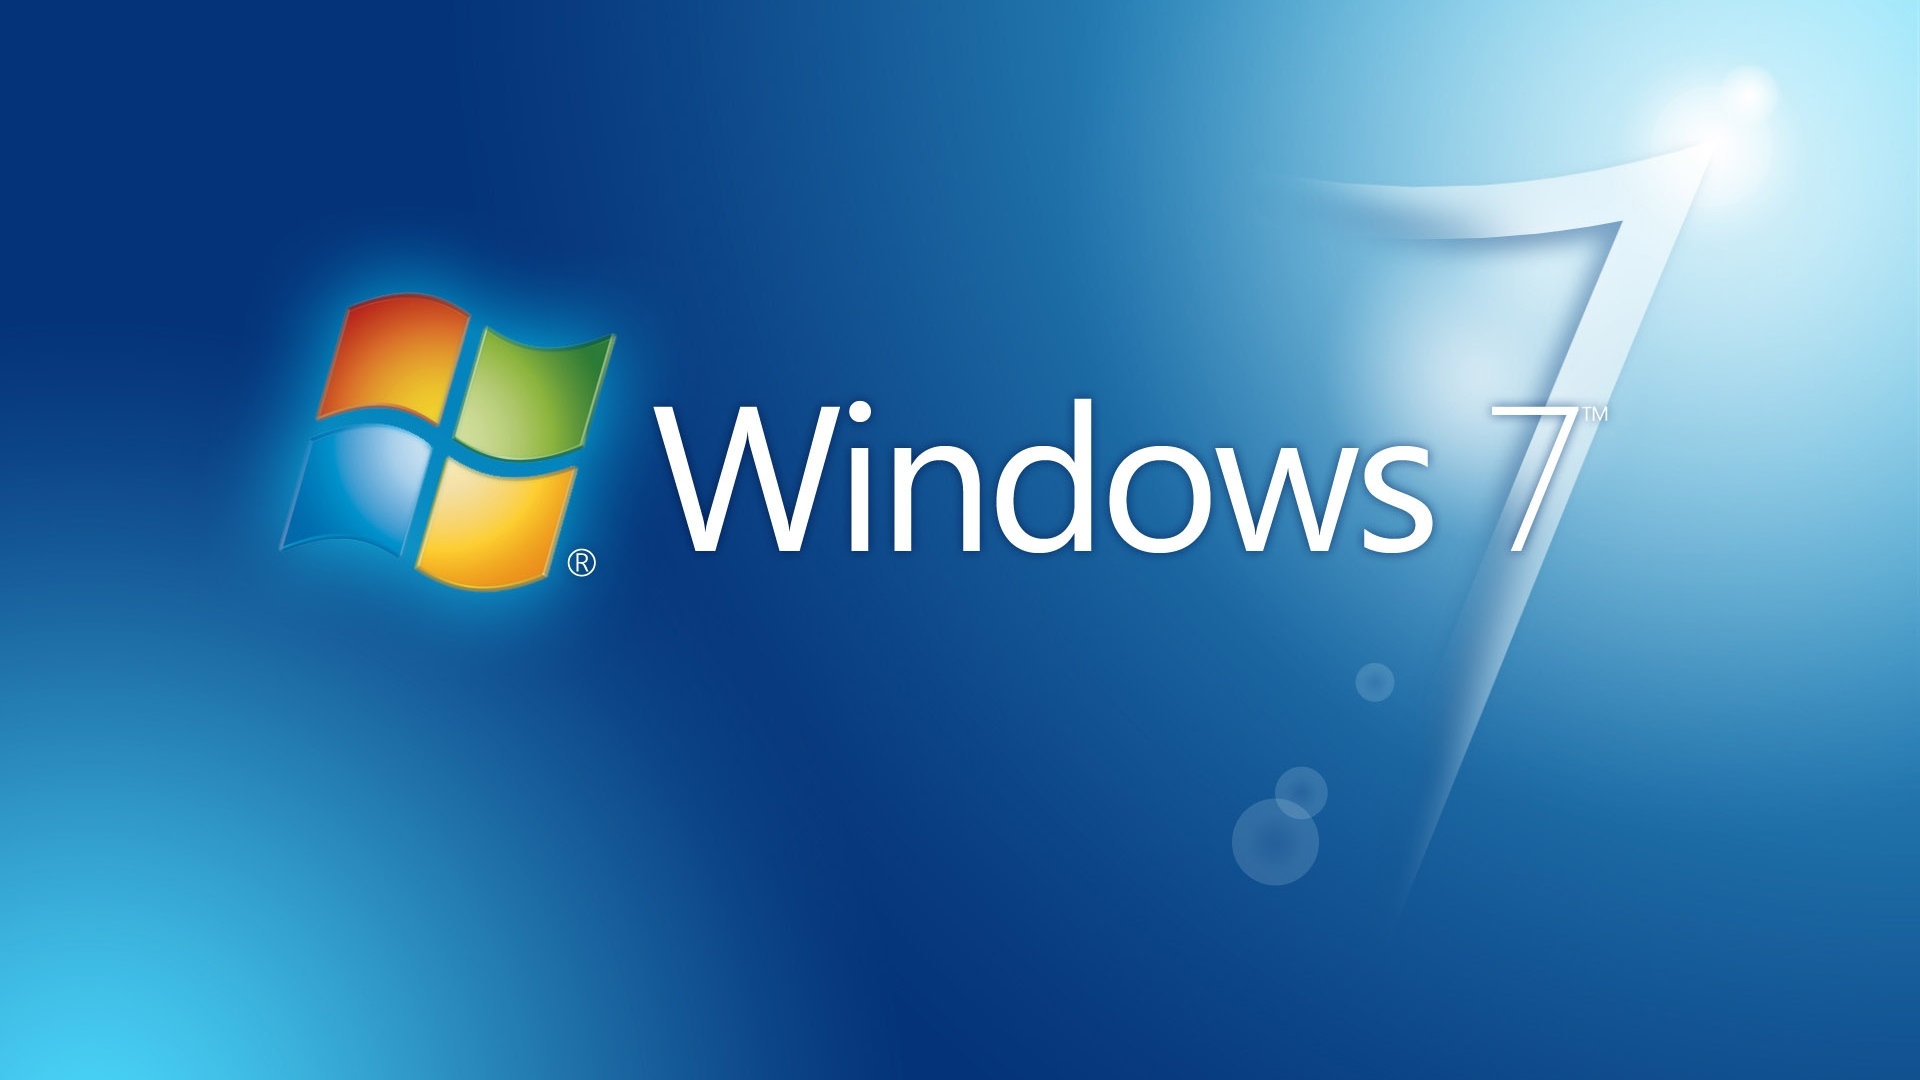 180 Windows 7 HD Wallpapers and Backgrounds